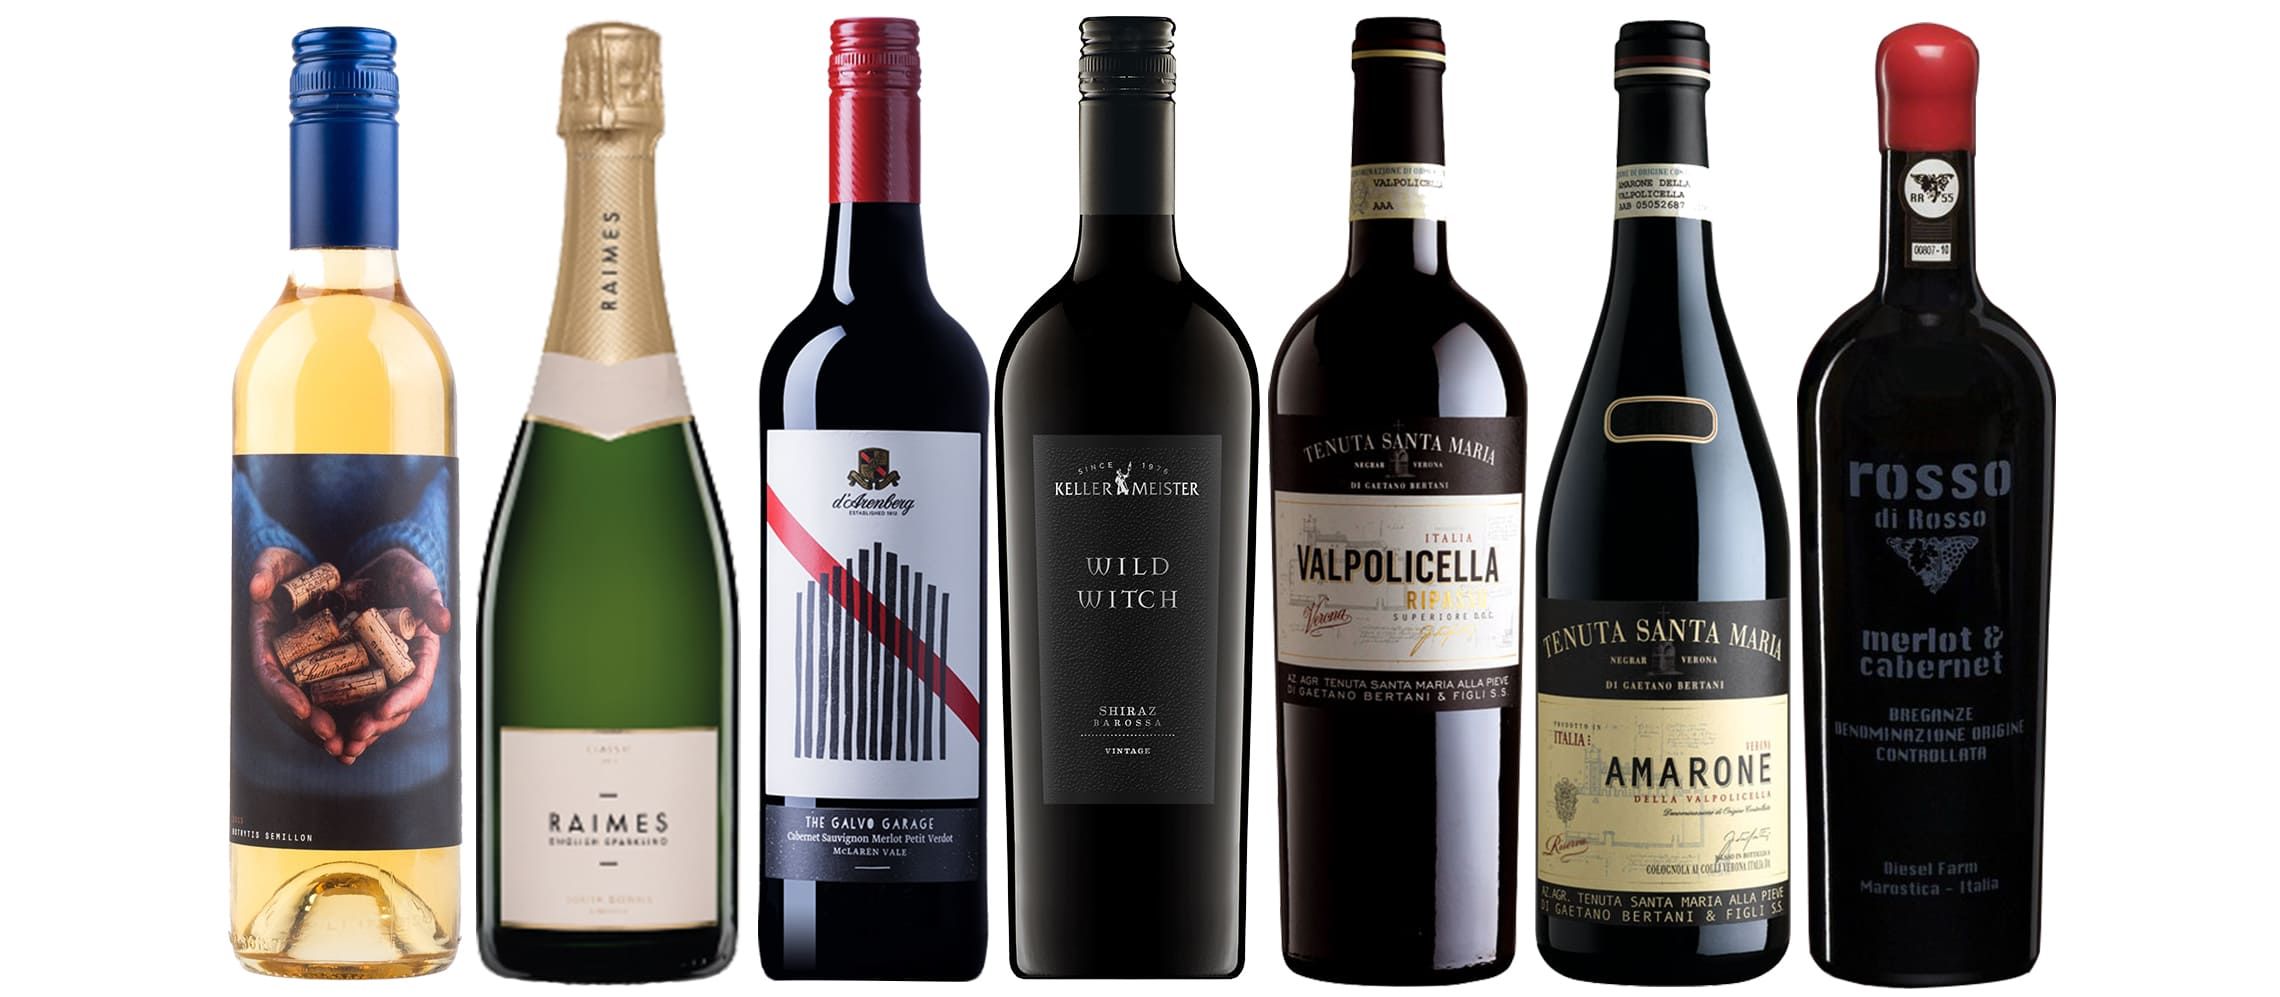 Photo for: Top Wines From 2019 the London Wine Competition